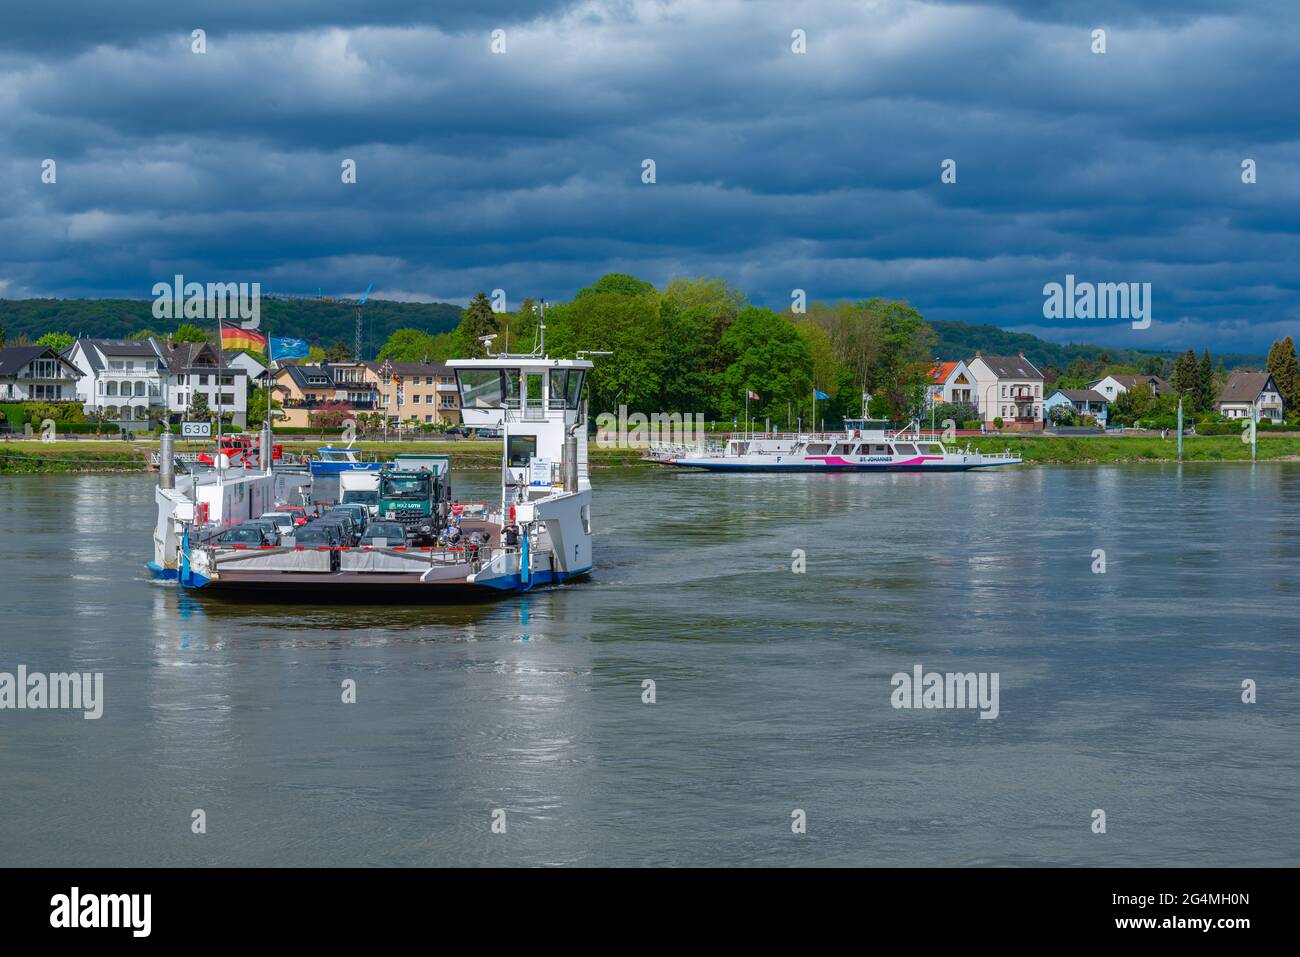 Ferry boats on the Rhine River between Linz and Remagen transporting vehicles and passengers, Linz, Rhineland-Palatinate, Germany, Europe Stock Photo